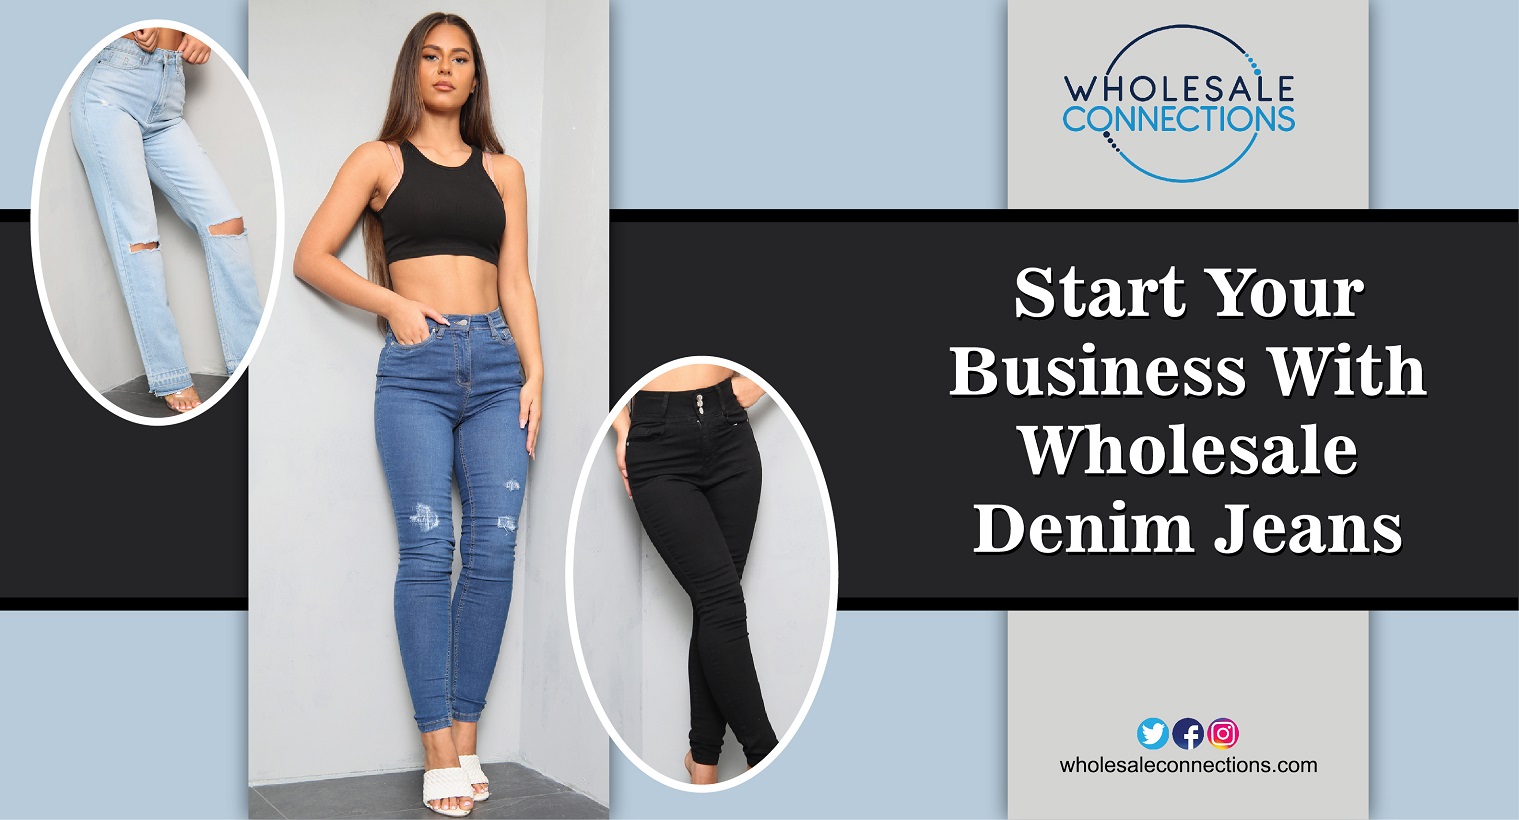 Start Your Business With Wholesale Denim Jeans